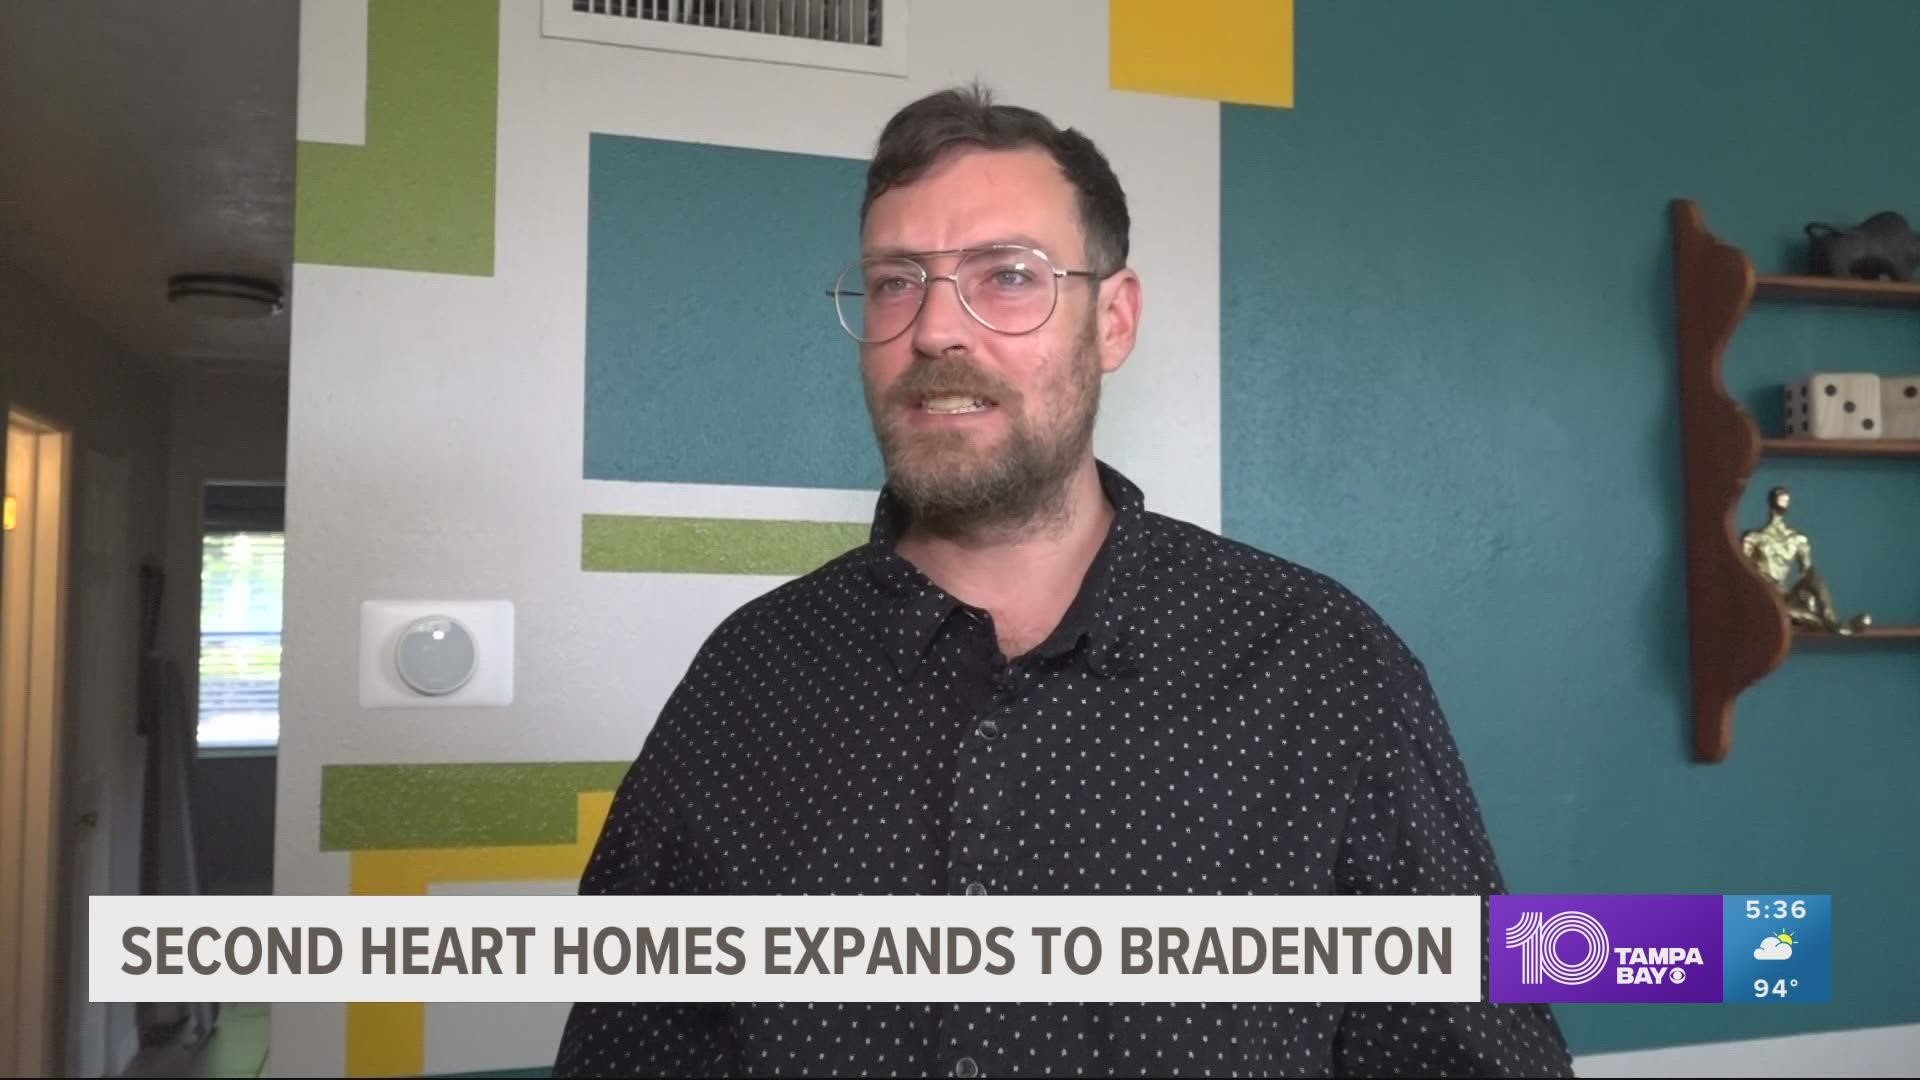 Second Heart Homes is assisting more than 40 men and women stay off the streets.